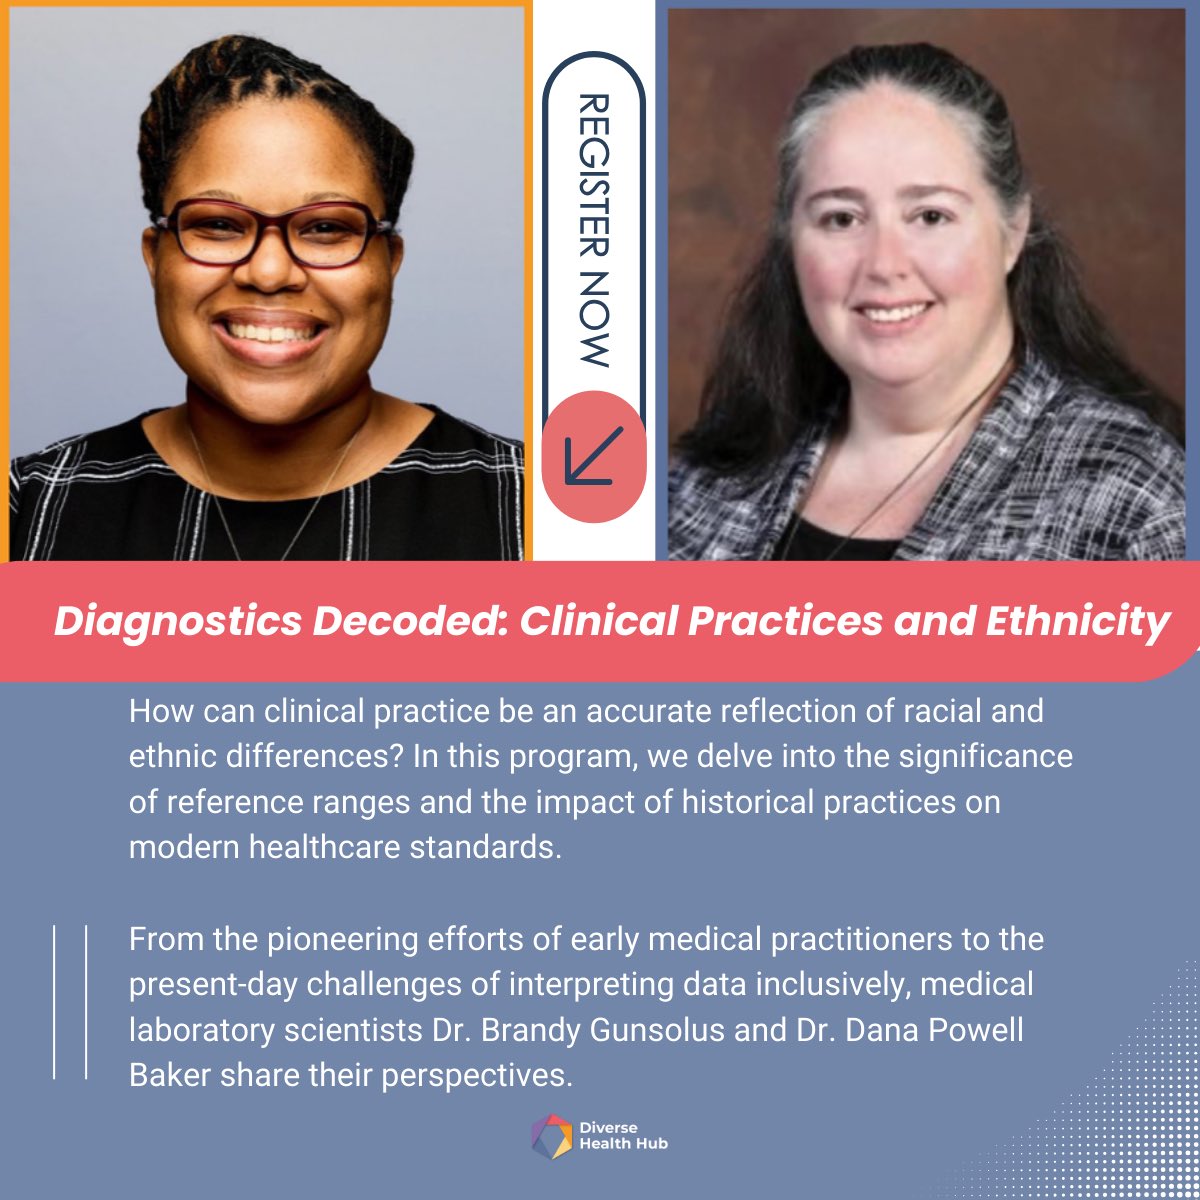 From the pioneering efforts of early medical practitioners to the present-day challenges of interpreting data inclusively, medical laboratory scientists Dr. Brandy Gunsolus @BnrdG and Dr. Dana Powell Baker @ThatLabChick share their perspectives. Register: bit.ly/44y1HdL